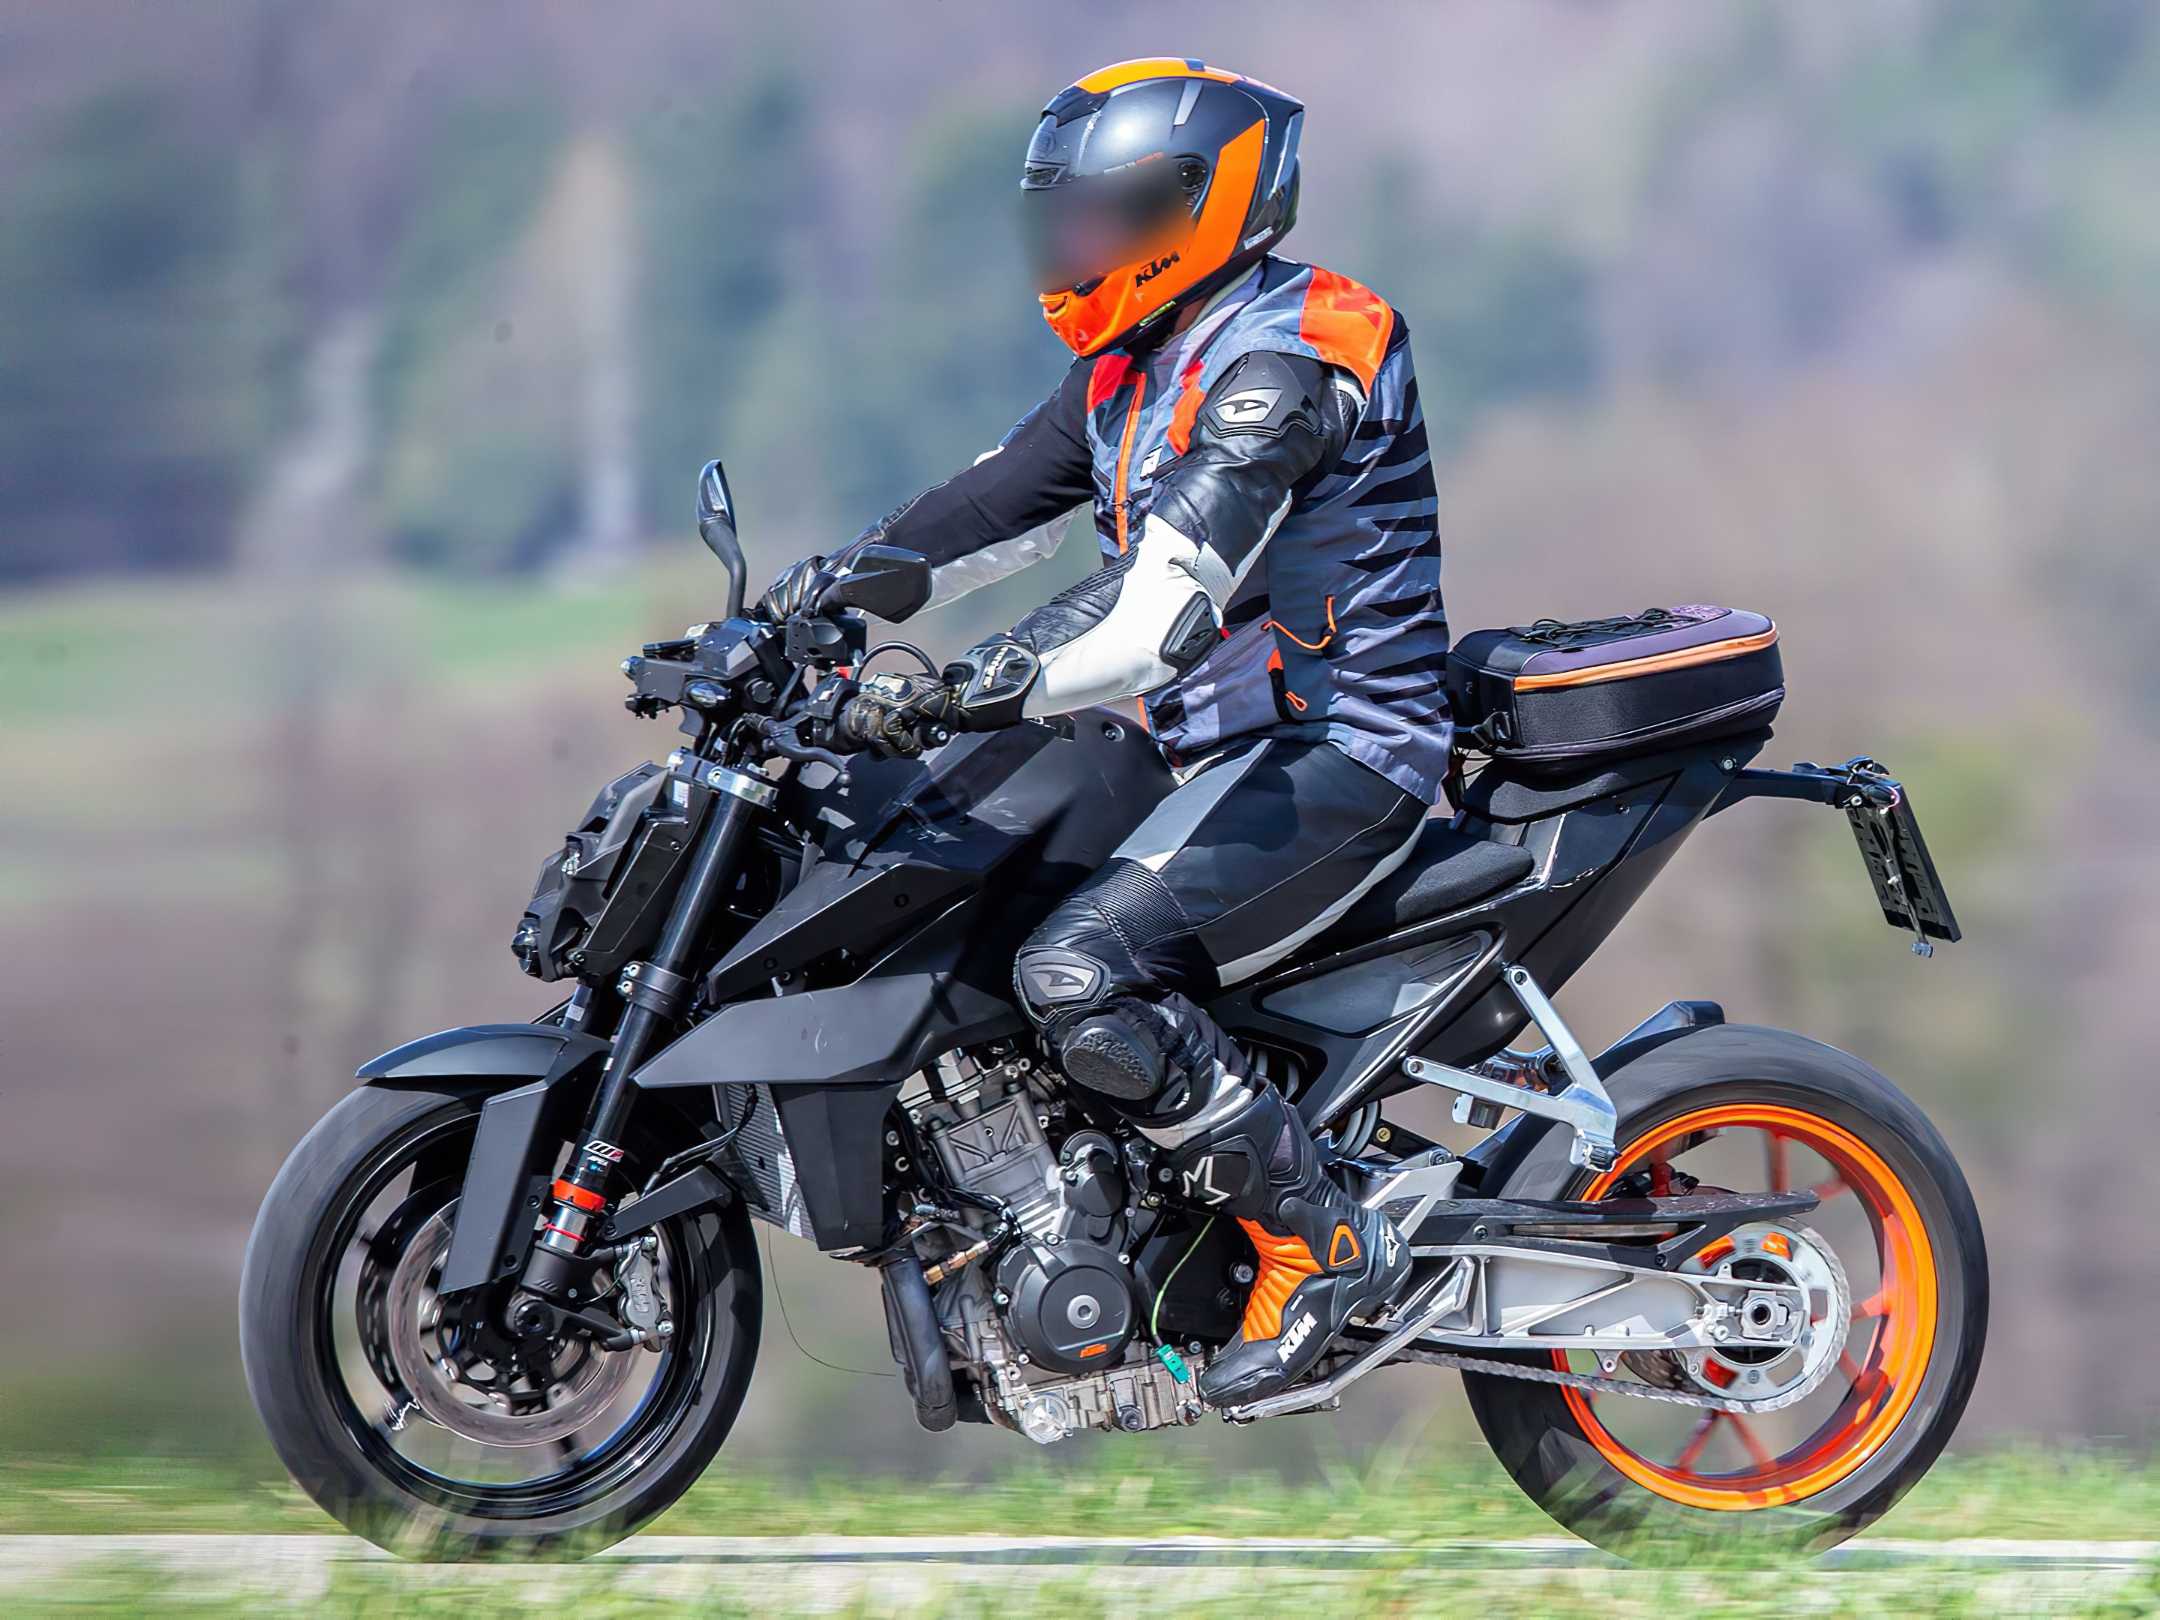 KTM Introduces New Color Schemes For Some Street Models - Roadracing World  Magazine